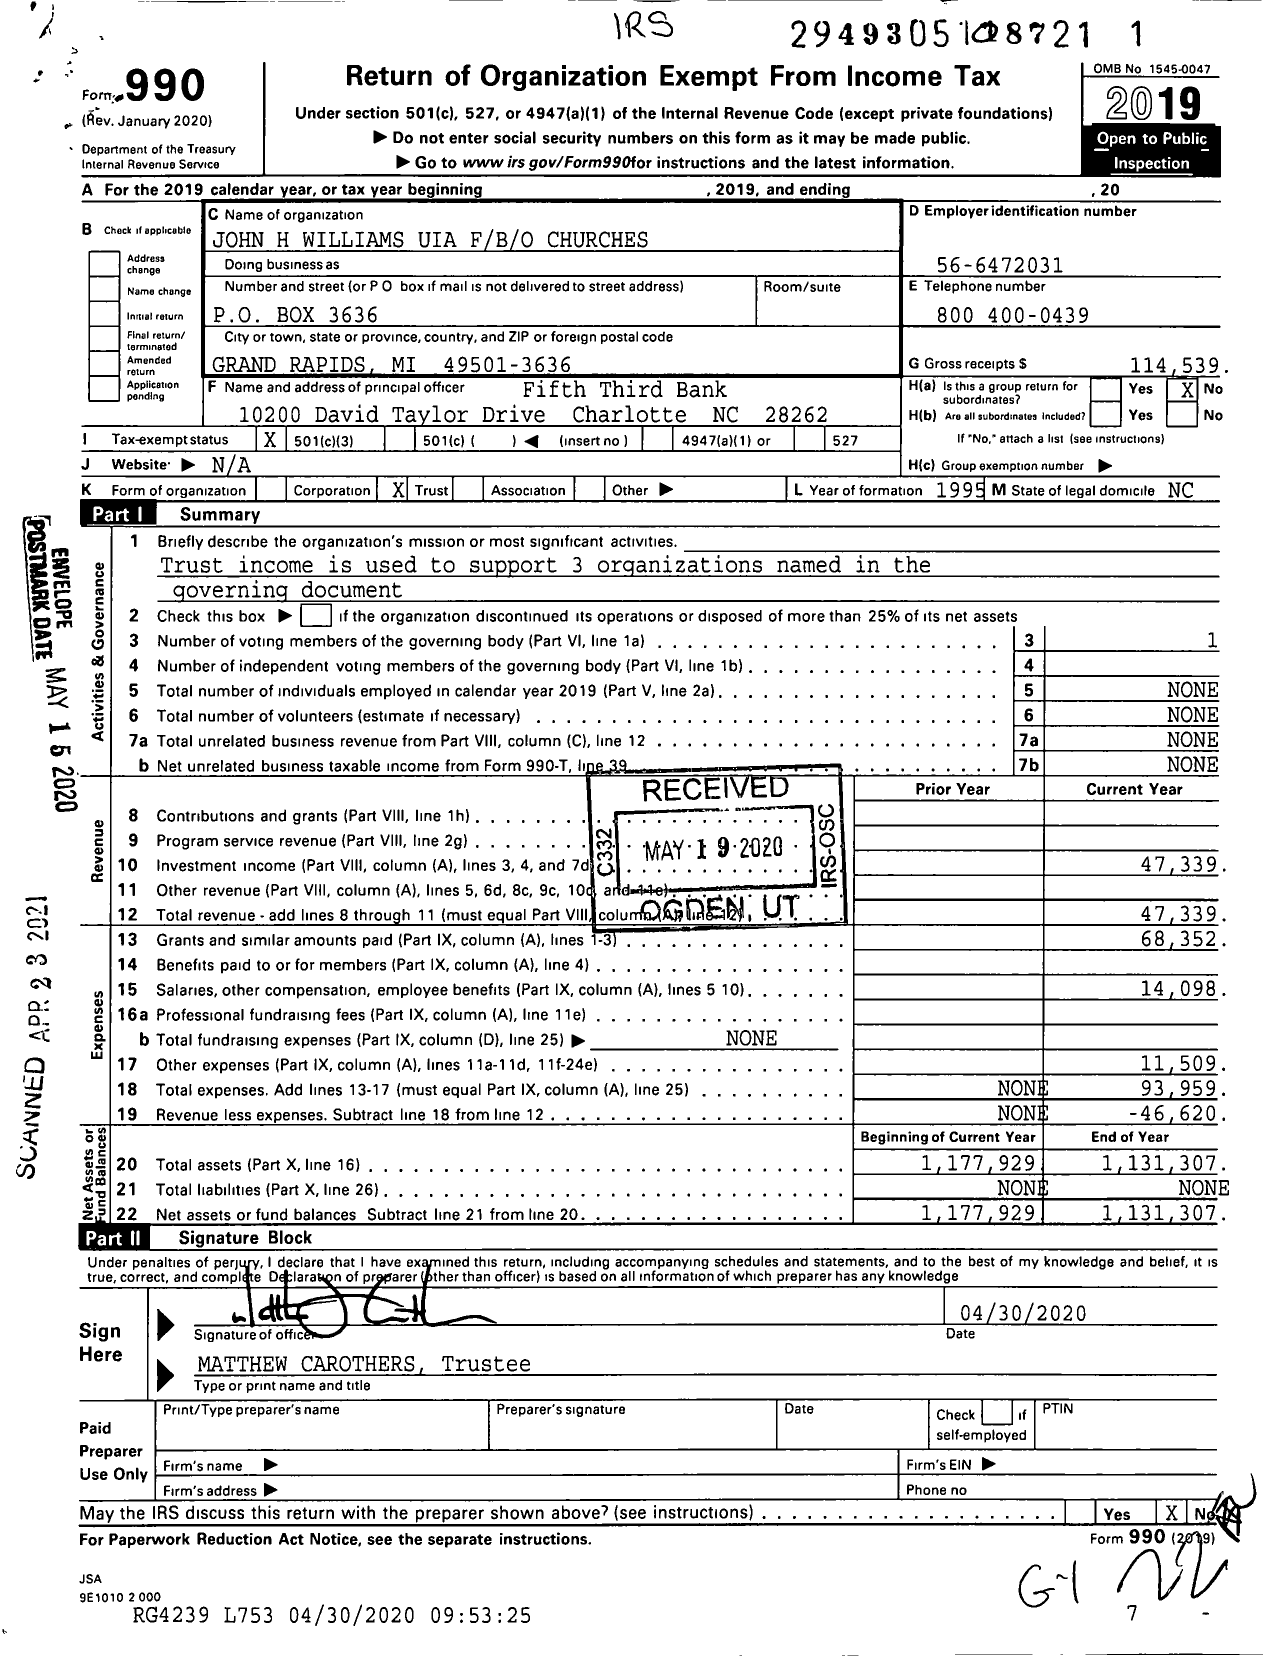 Image of first page of 2019 Form 990 for John H Williams Uia Fbo Churches